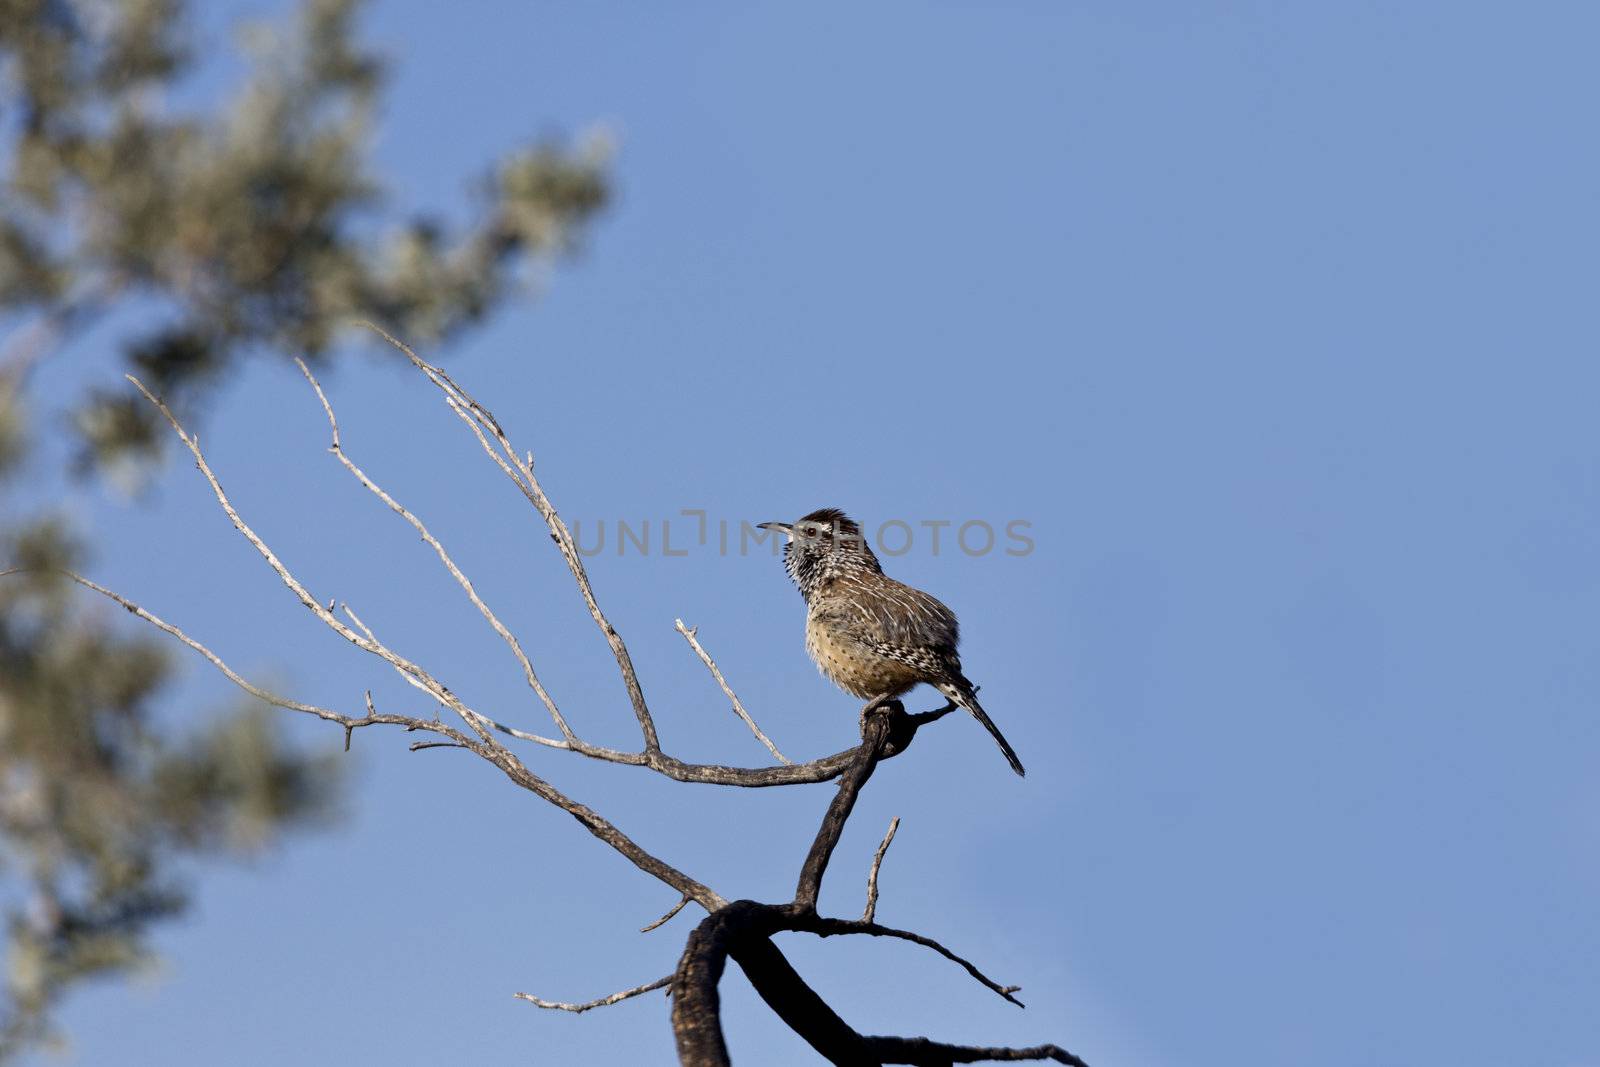 Cactus wren on multipronged branch with copy space to right on blue sky;